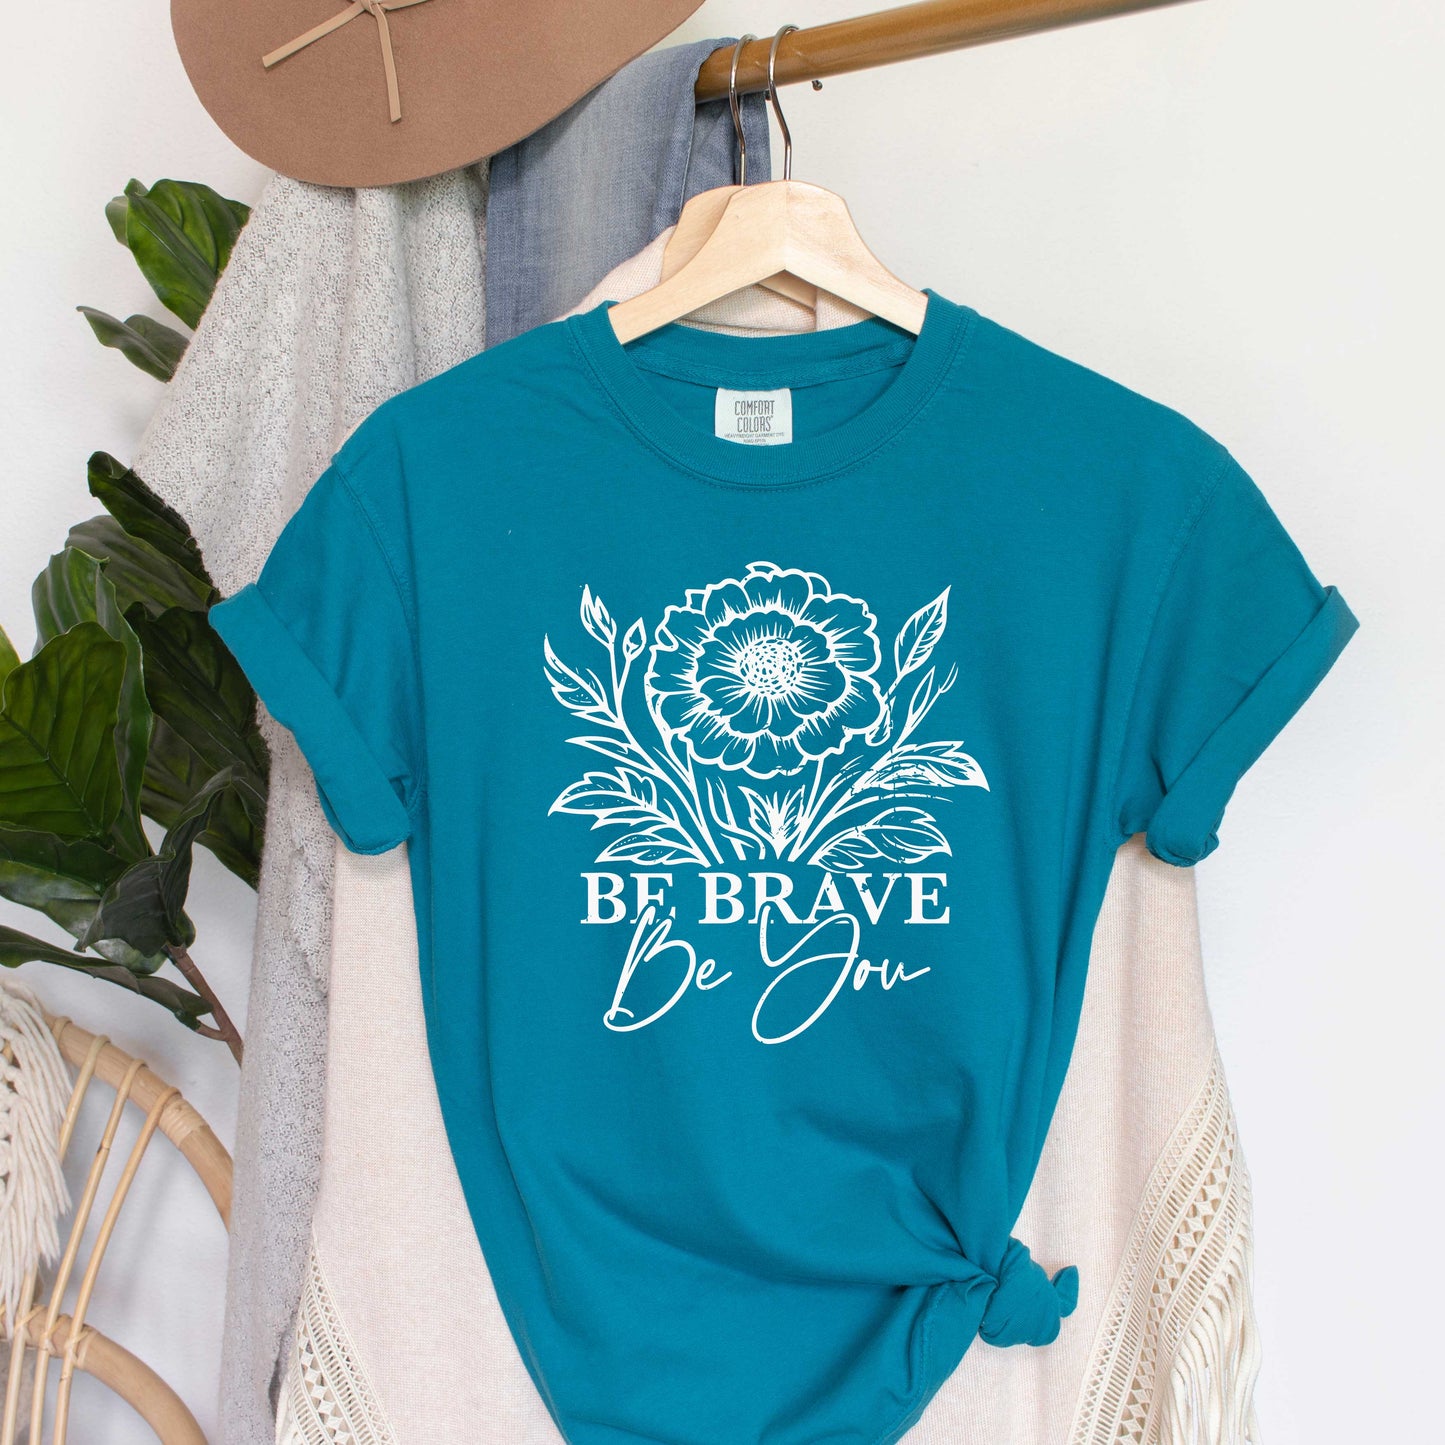 Be Brave Be You | Garment Dyed Tee